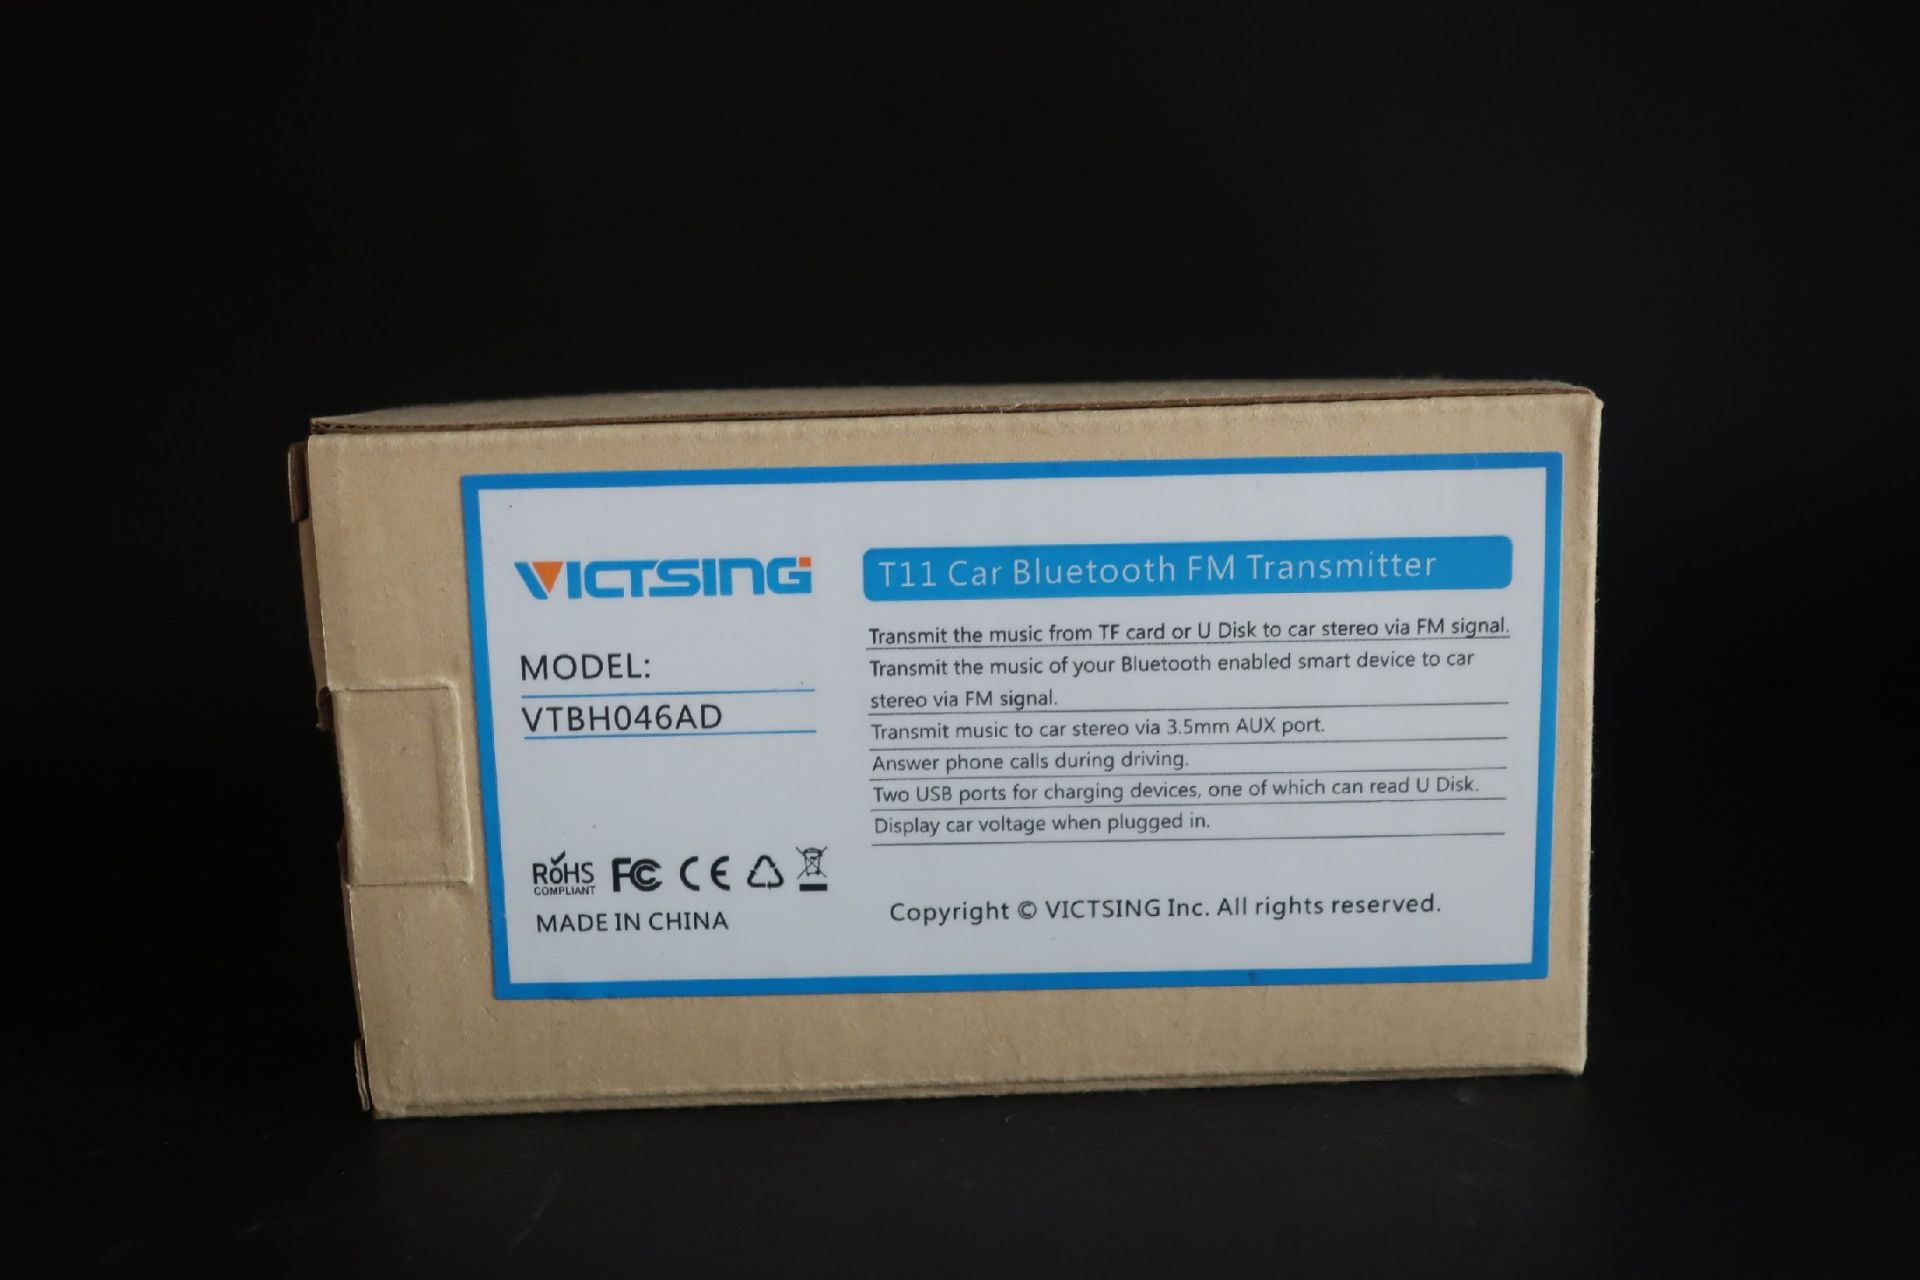 Fifteen boxed as new Victsing T11 Car Bluetooth FM Transmitters (Model: VTBH046AD).